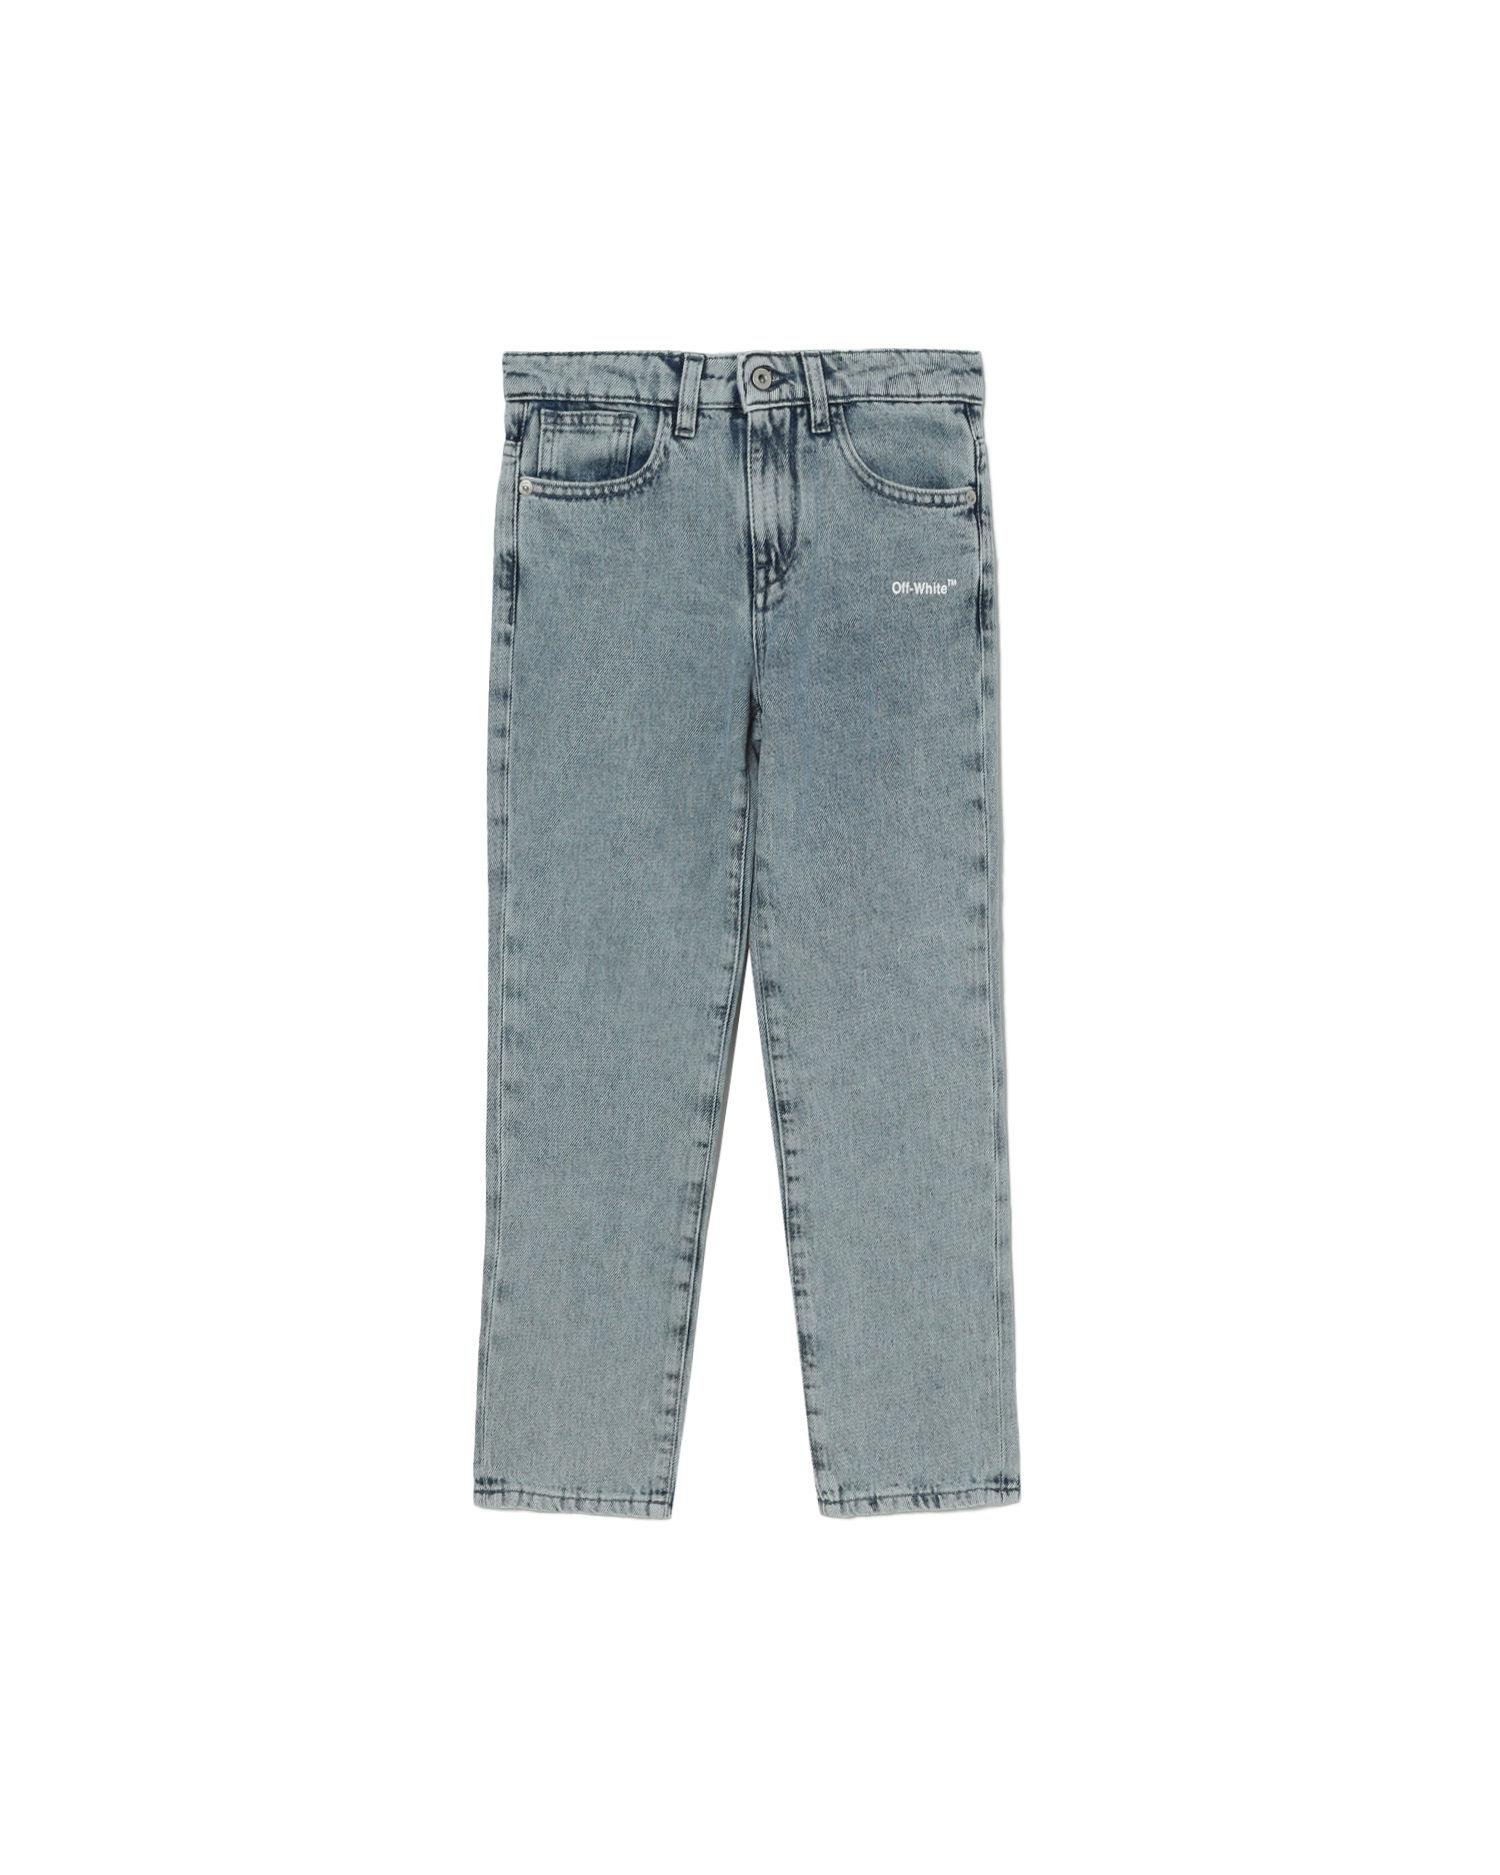 Rubber arrows denim jeans by OFF-WHITE